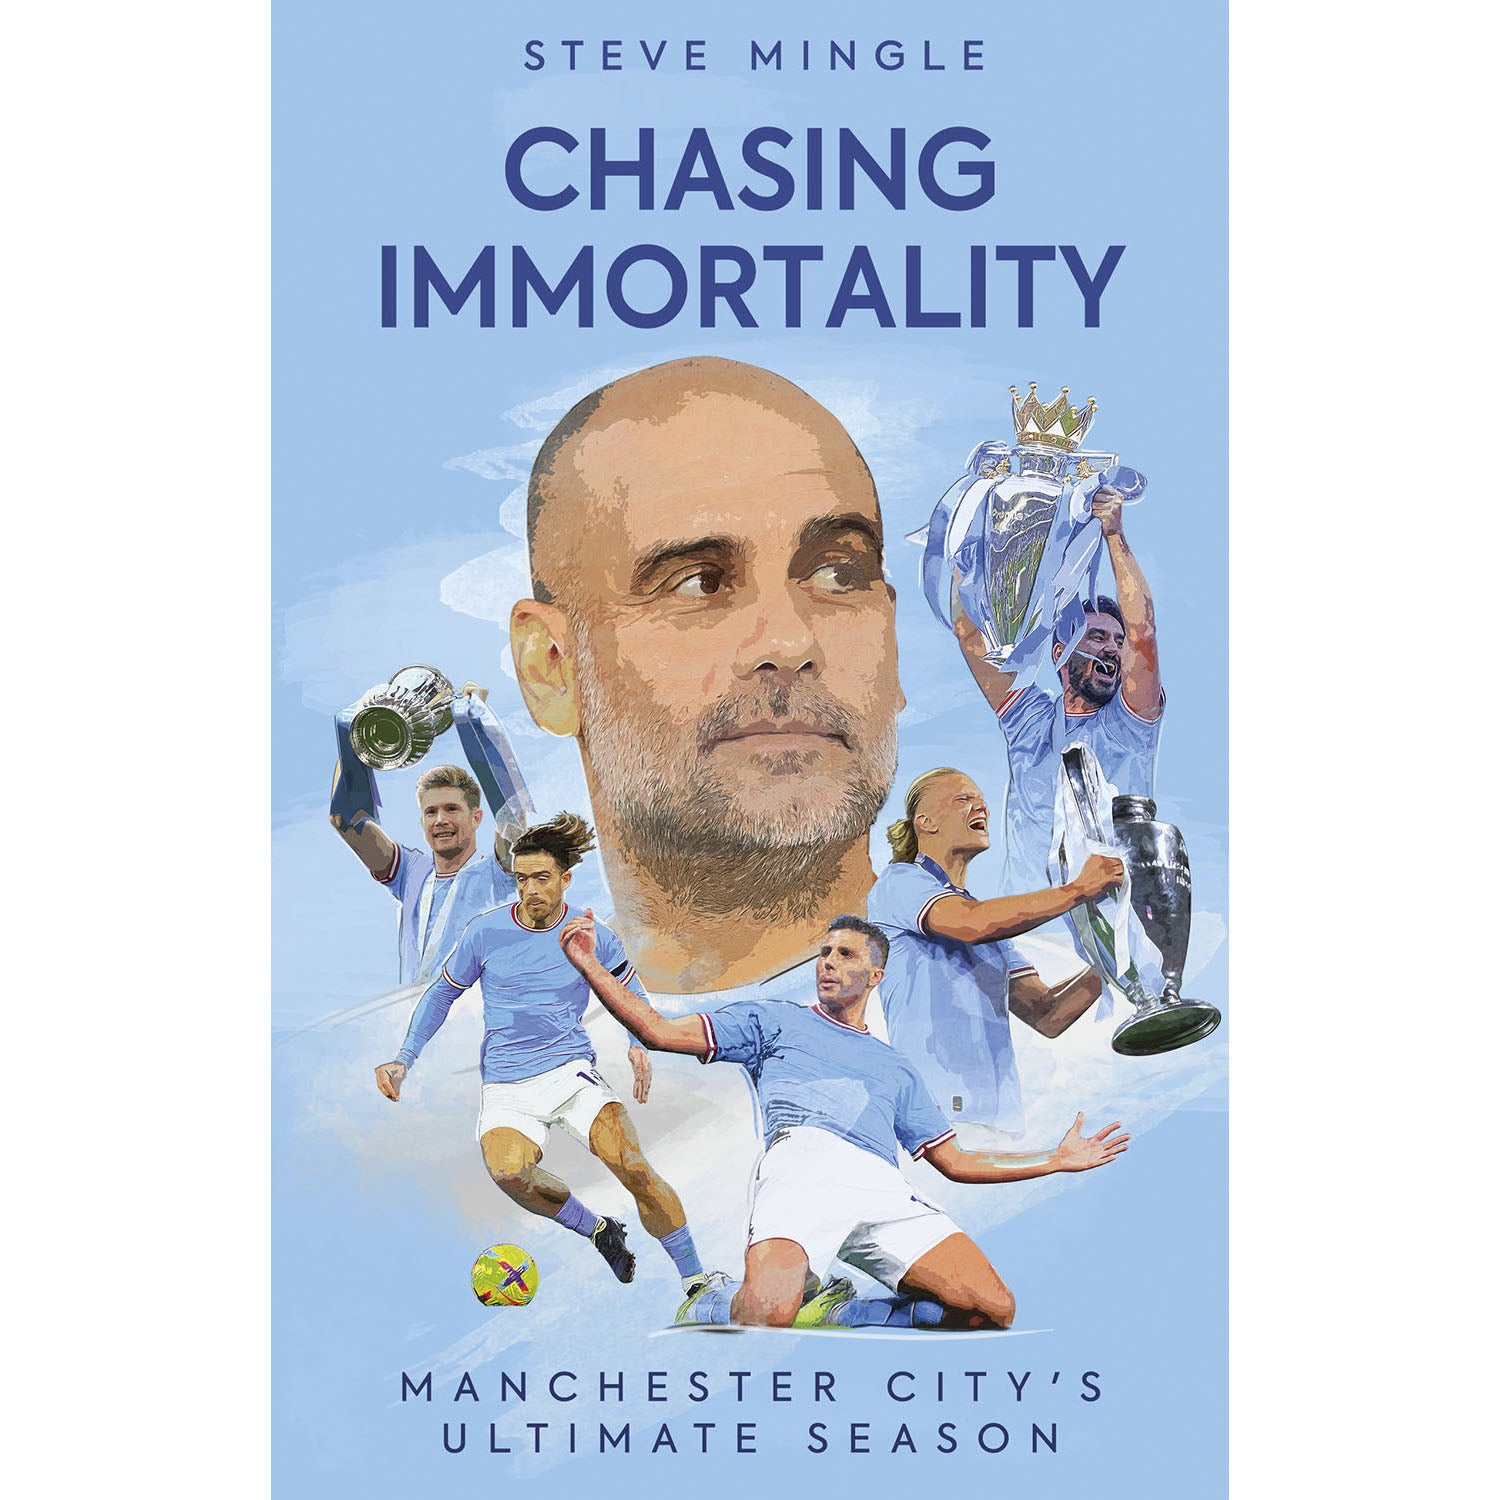 Chasing Immortality – Manchester City's Ultimate Season